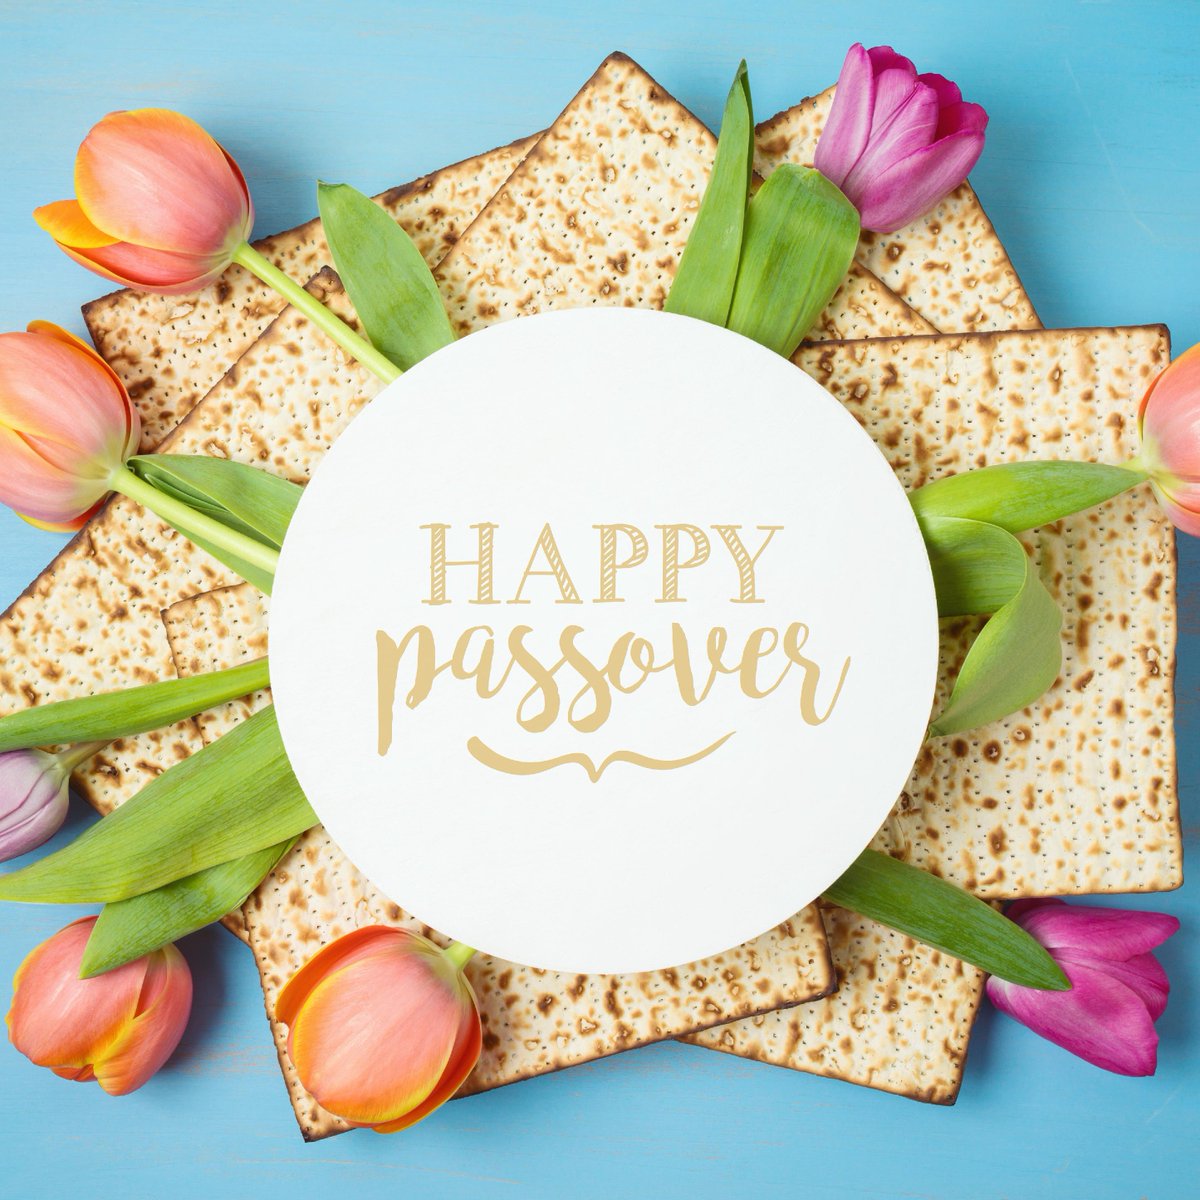 Celebrating Passover! 🫓 Passover is a major Jewish holiday that commemorates the Israelites' liberation from slavery in Egypt. It's a time for families and friends to gather for a special meal called a Seder, filled with symbolic foods, storytelling, and rituals. We rememb...